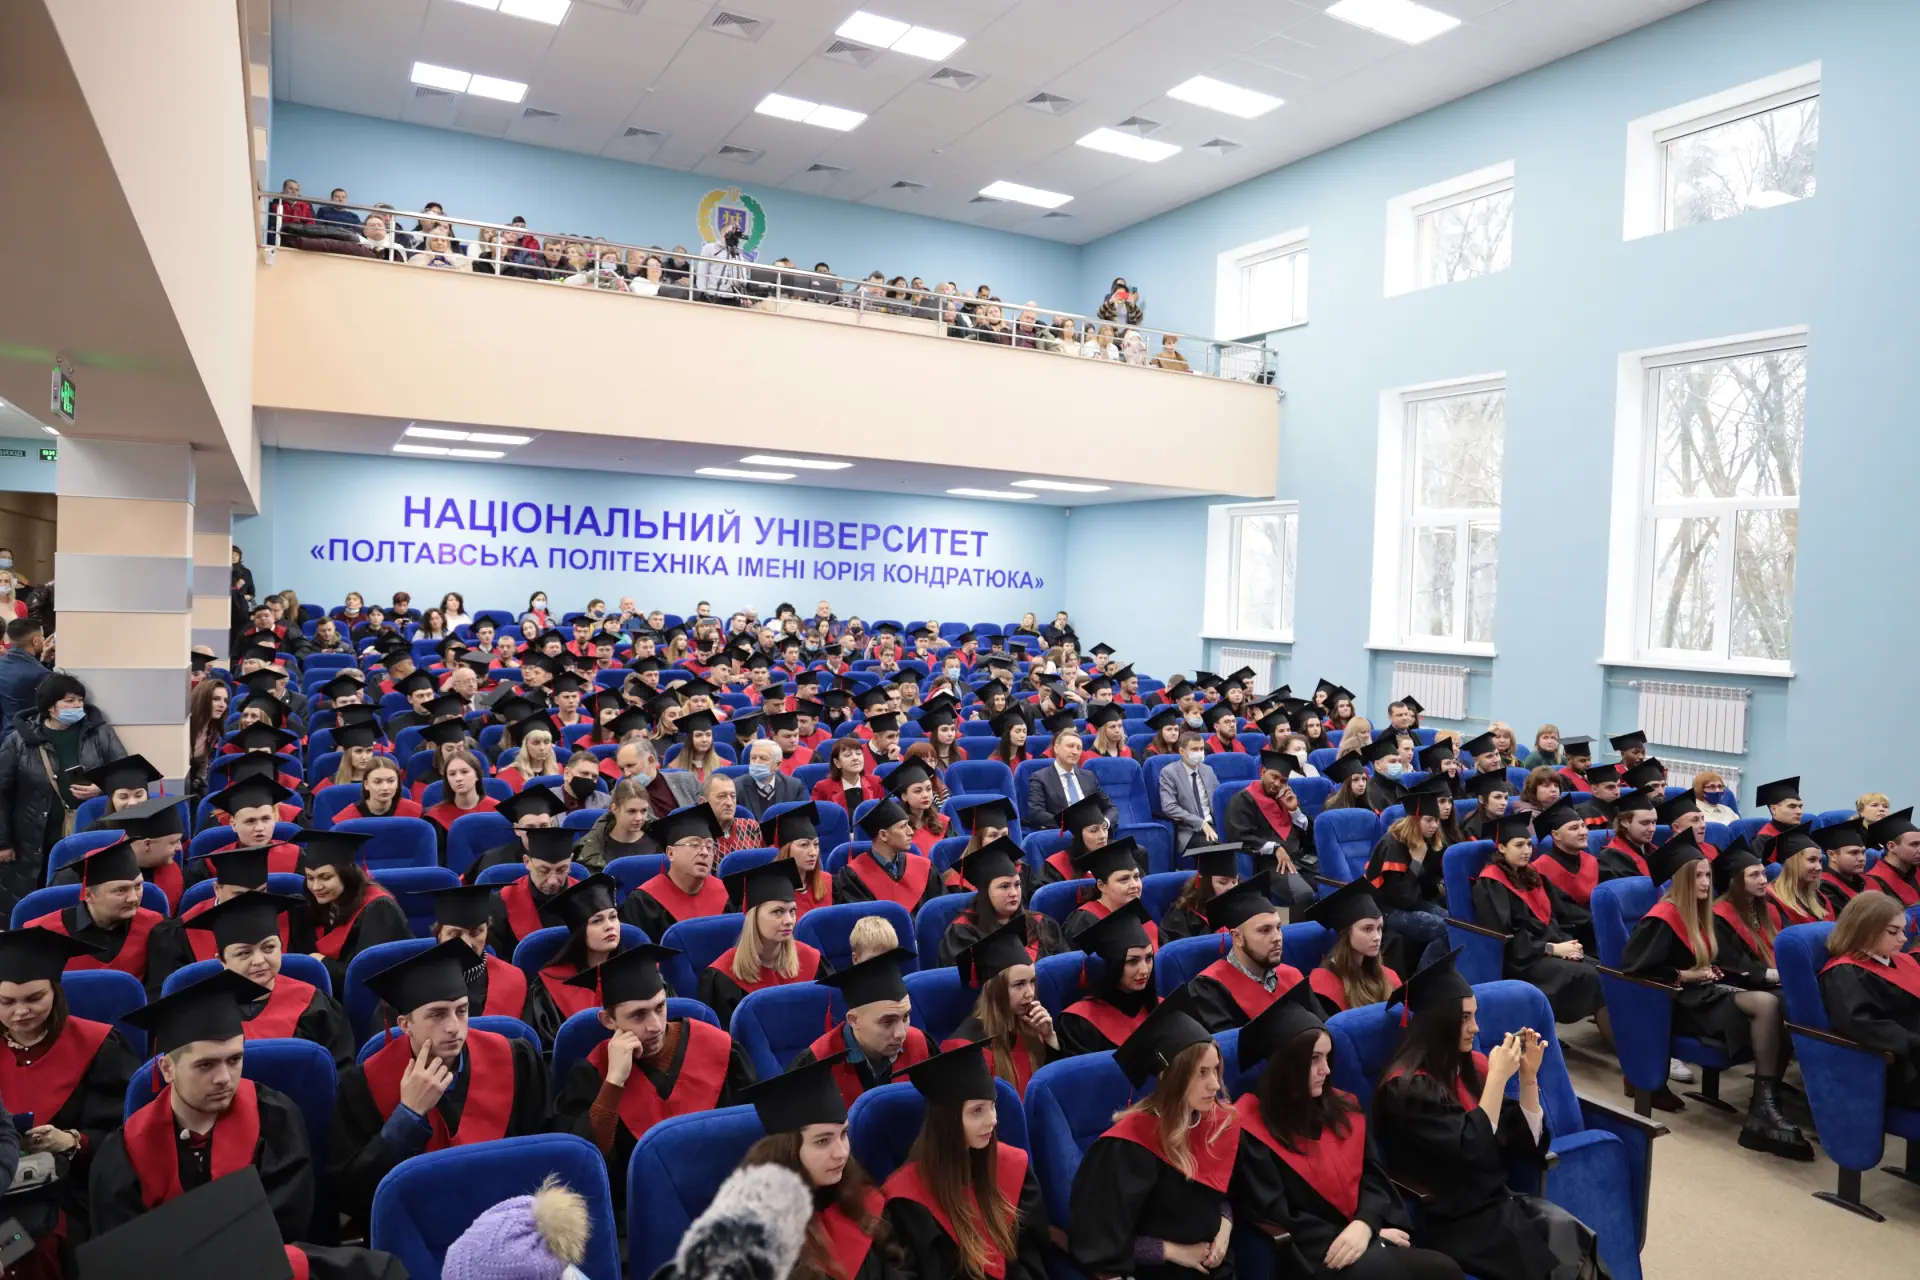 Graduated master’s students are presented diplomas and awards for special achievements